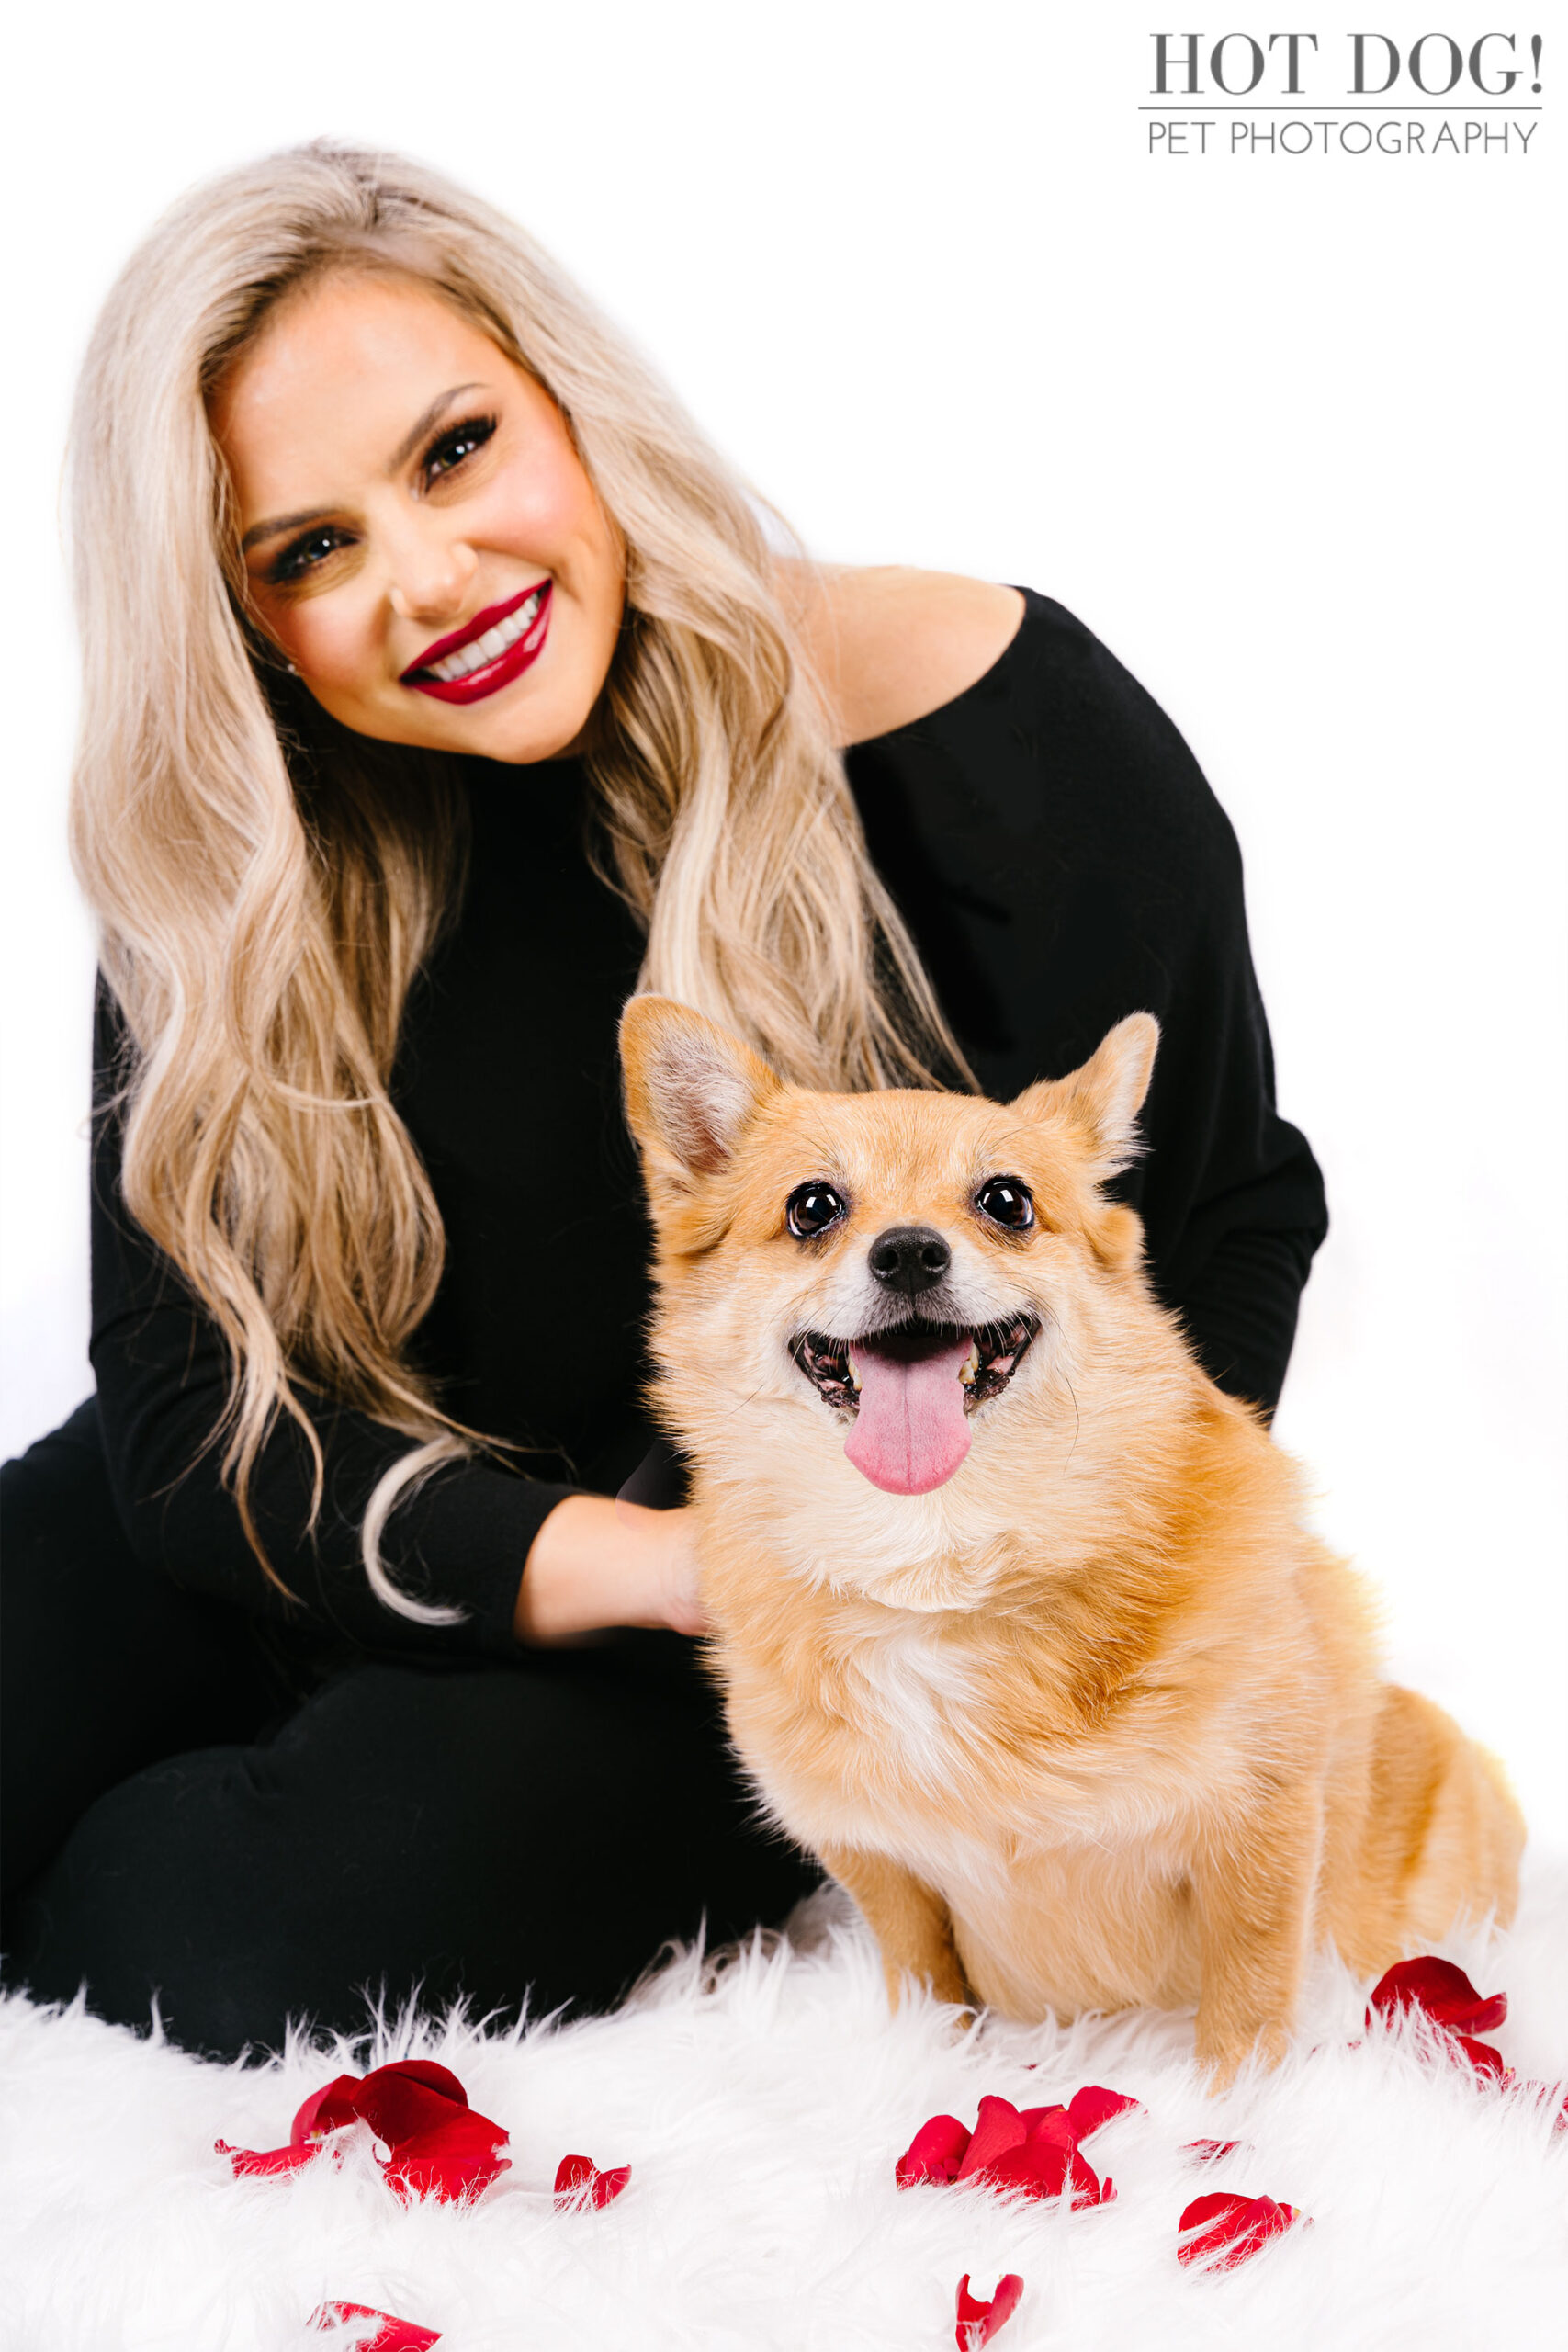 Tinkerbelle the Toy Pomeranian Corgi mix is the star of this professional pet photo session by Hot Dog! Pet Photography.